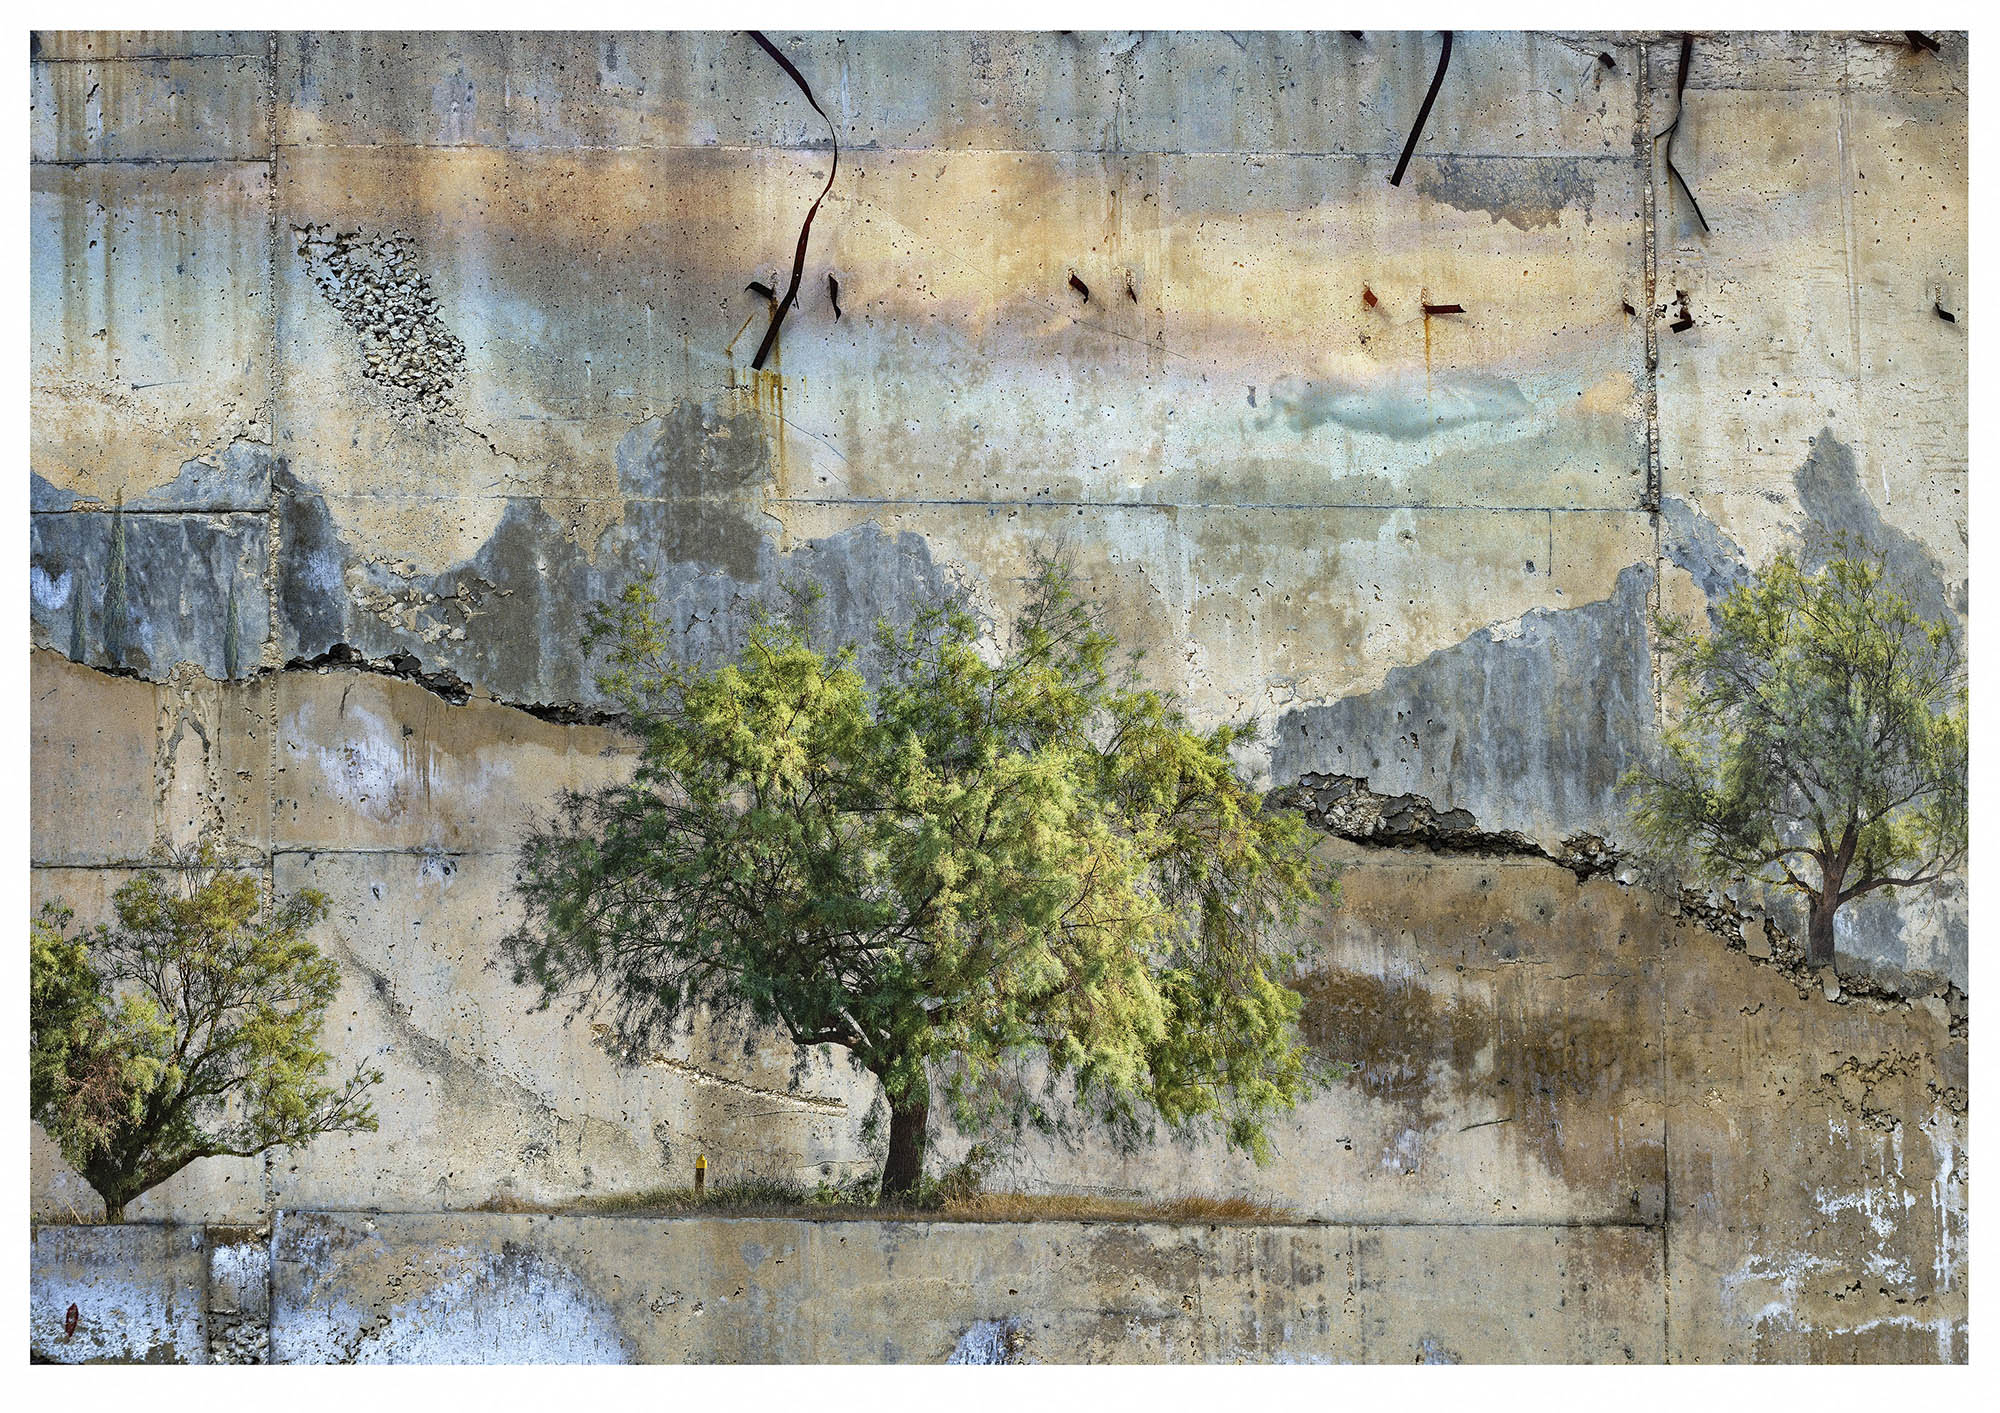 Composite photograph of distressed wall and trees looking like a landscape